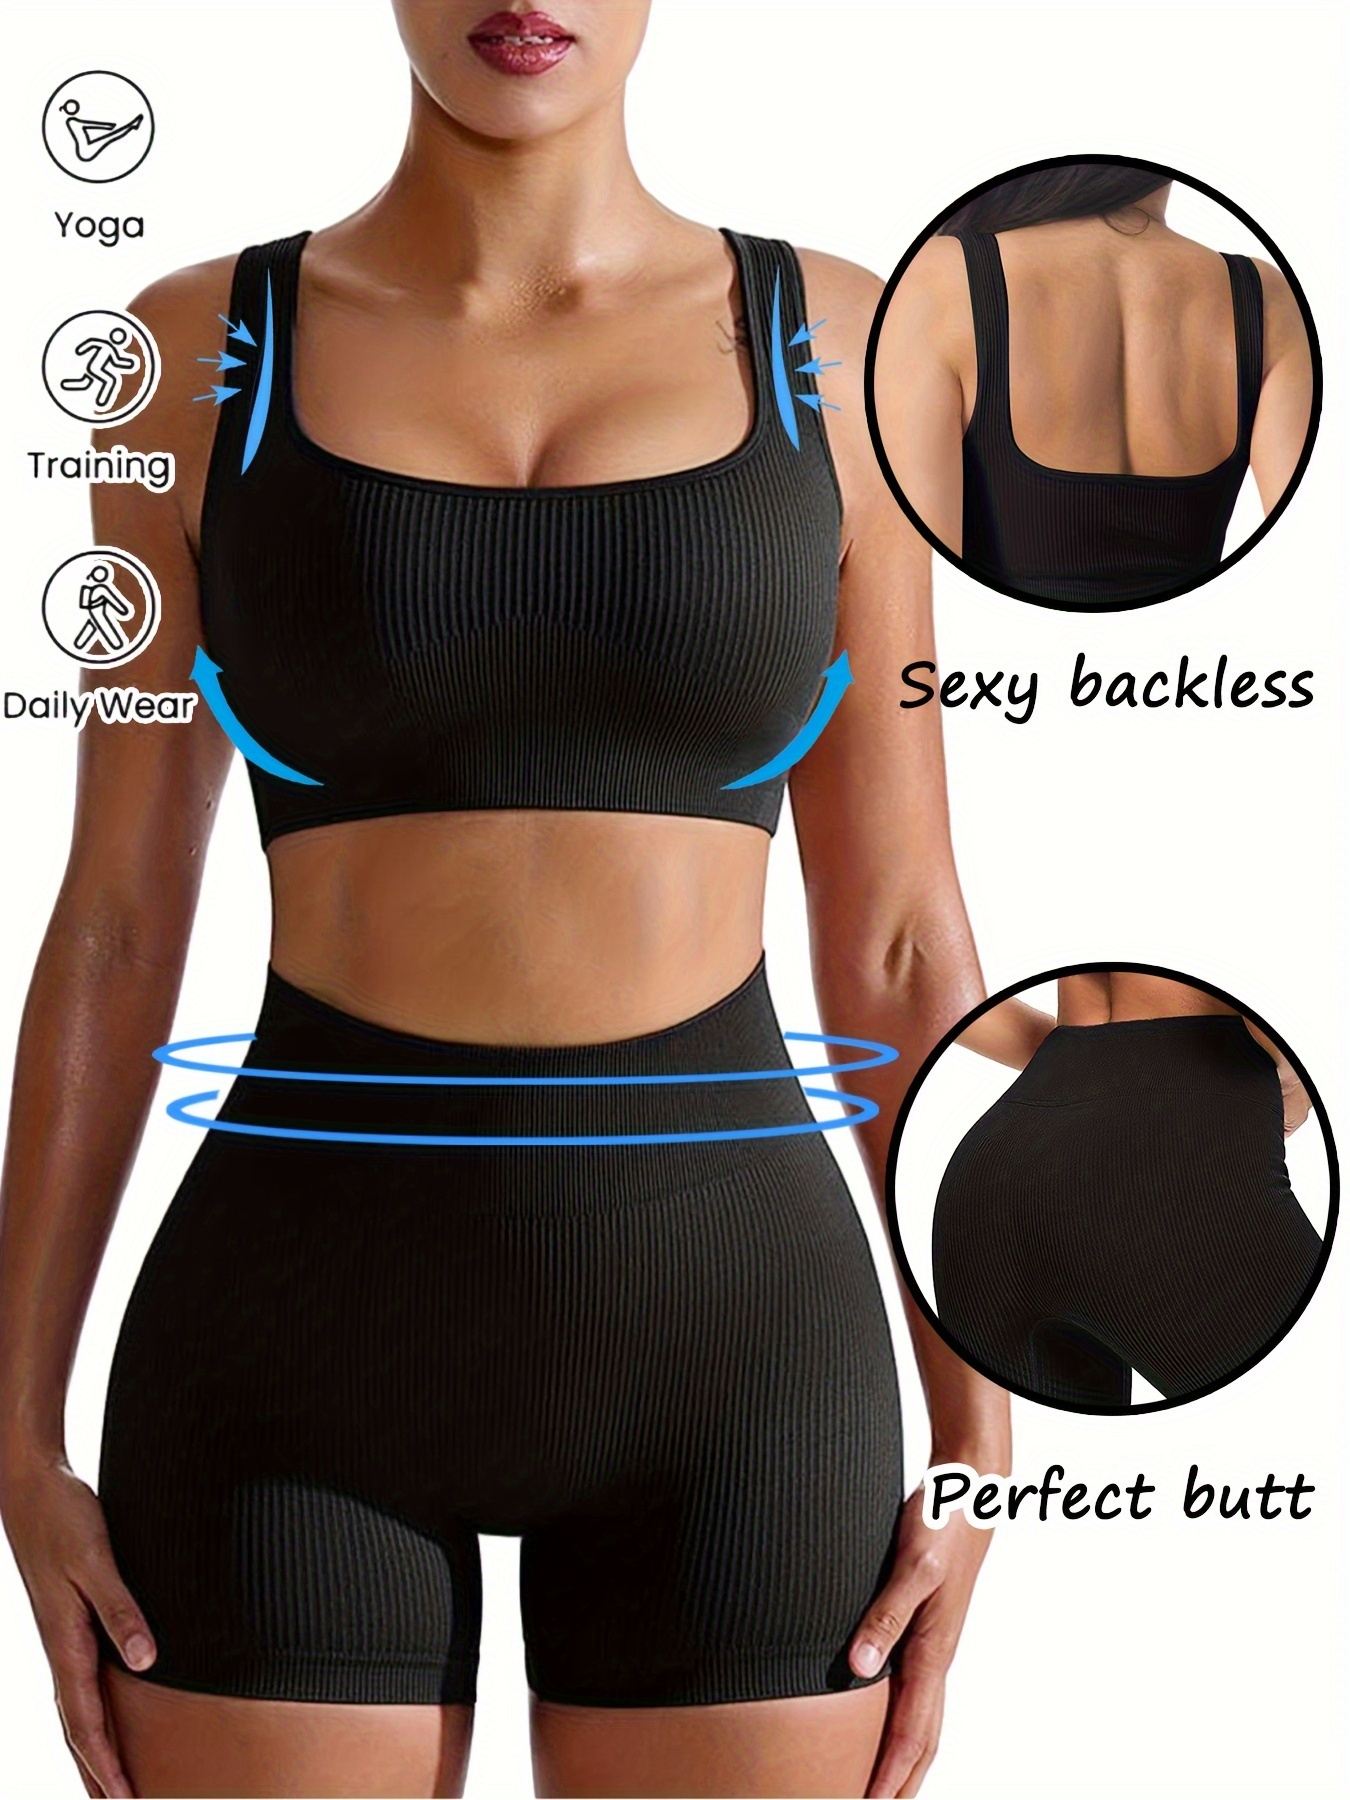 Solid color Short Workout Gym Leggings Biker Shorts Skims Sexy Sports Yoga  High Wsist Tight Fitness For Women Side Pocket Booty